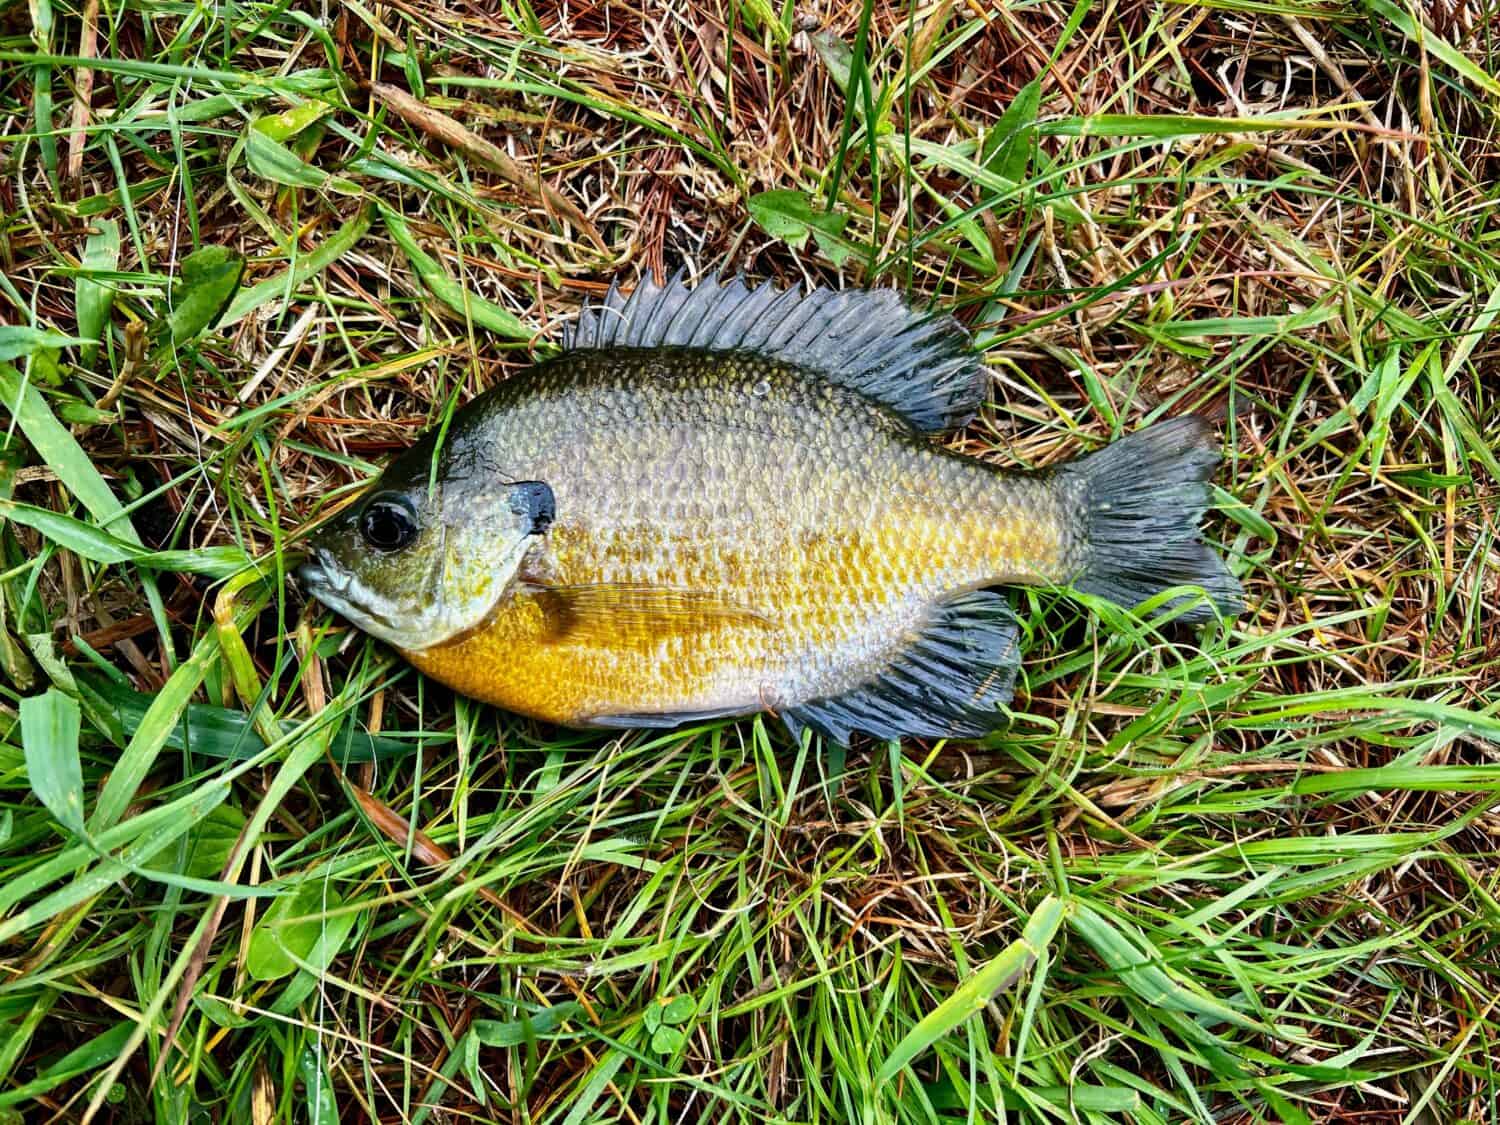 Bluegill or Brim freshly caught is laying on a grass background